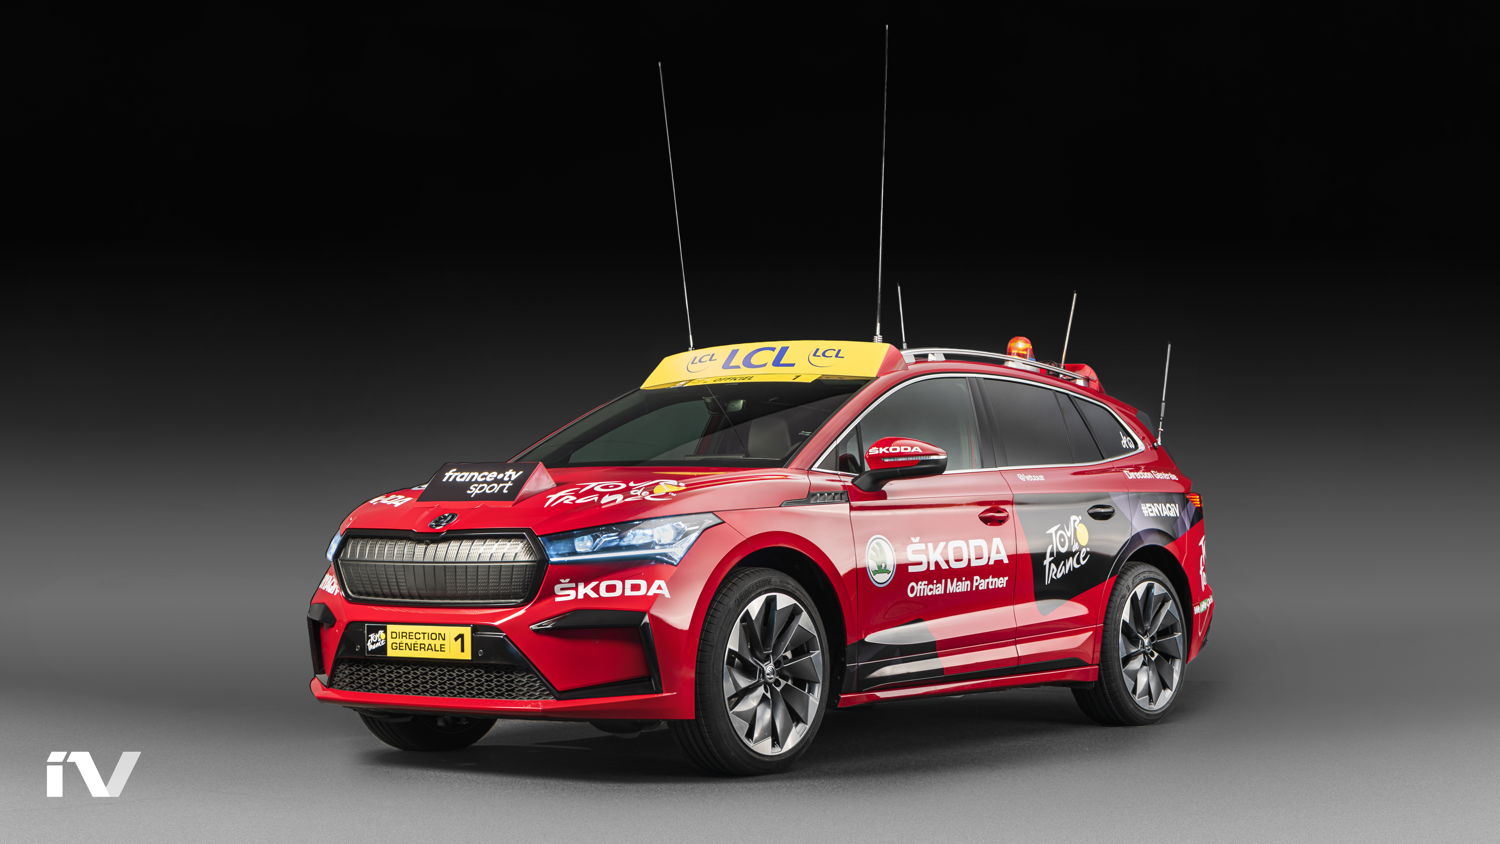 The ŠKODA ENYAQ iV will be demonstrating its sporting qualities as the lead vehicle ('Red Car') of the Tour de France starting tomorrow. The first ŠKODA model based on the modular electrification toolkit (MEB) has been kitted out for its role as the 'mobile control centre' for Tour Director Christian Prudhomme.